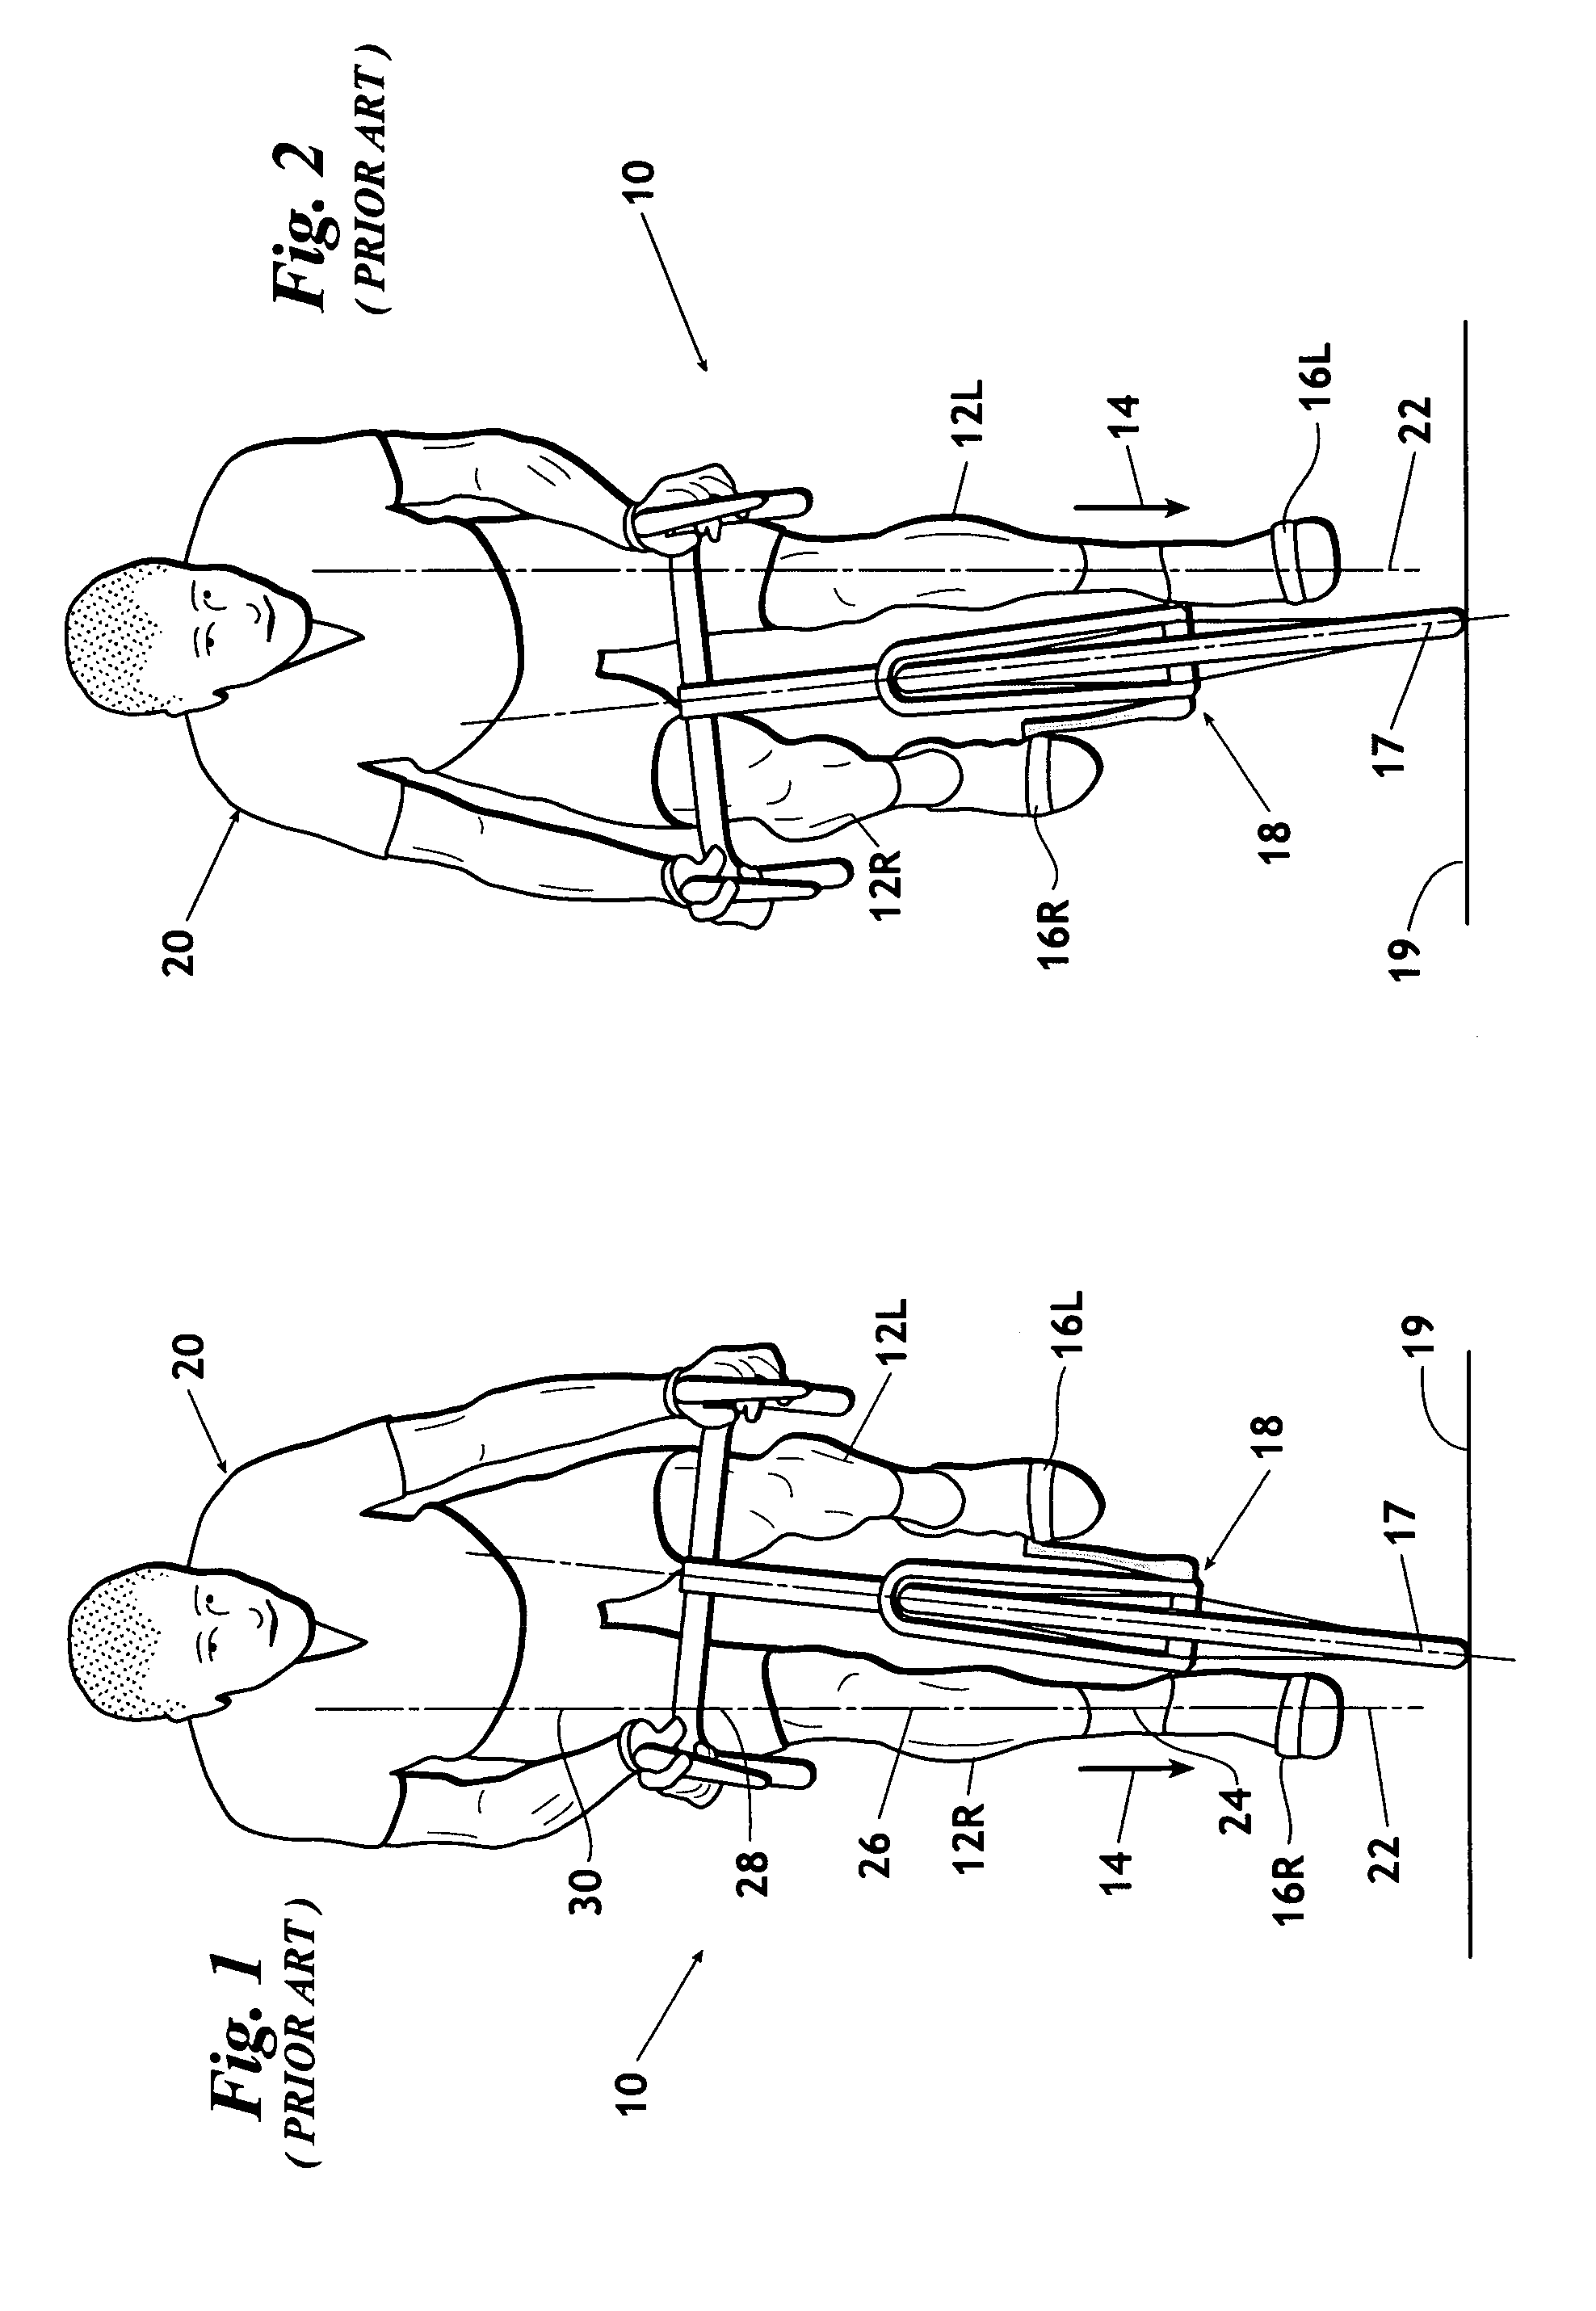 Dynamic system for a stationary bicycle